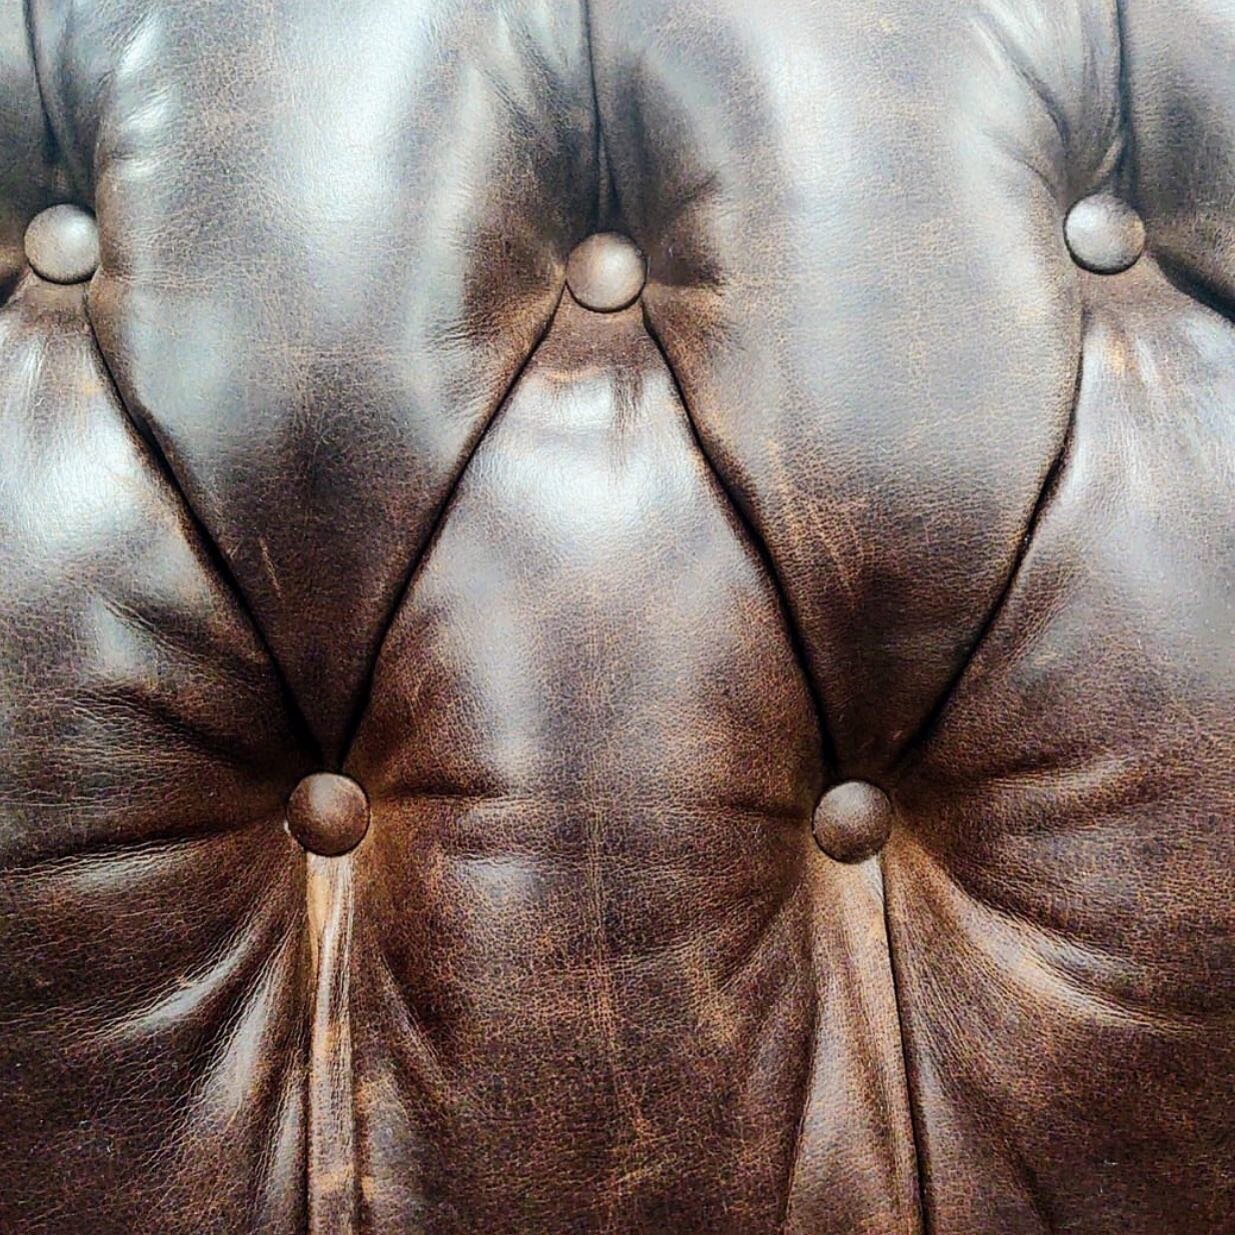 The character of leather 🙌
@paulrobertfurniture 

Whitney Evans, Ltd. 
Located at the @denverdesigndistrict
595 S. Broadway, Suite 109w
Denver, Colorado 80209
📱1(303)777-1886
Open Monday-Friday 9am-5pm
WhitneyEvansMarketing@gmail.com

#whitneyevans